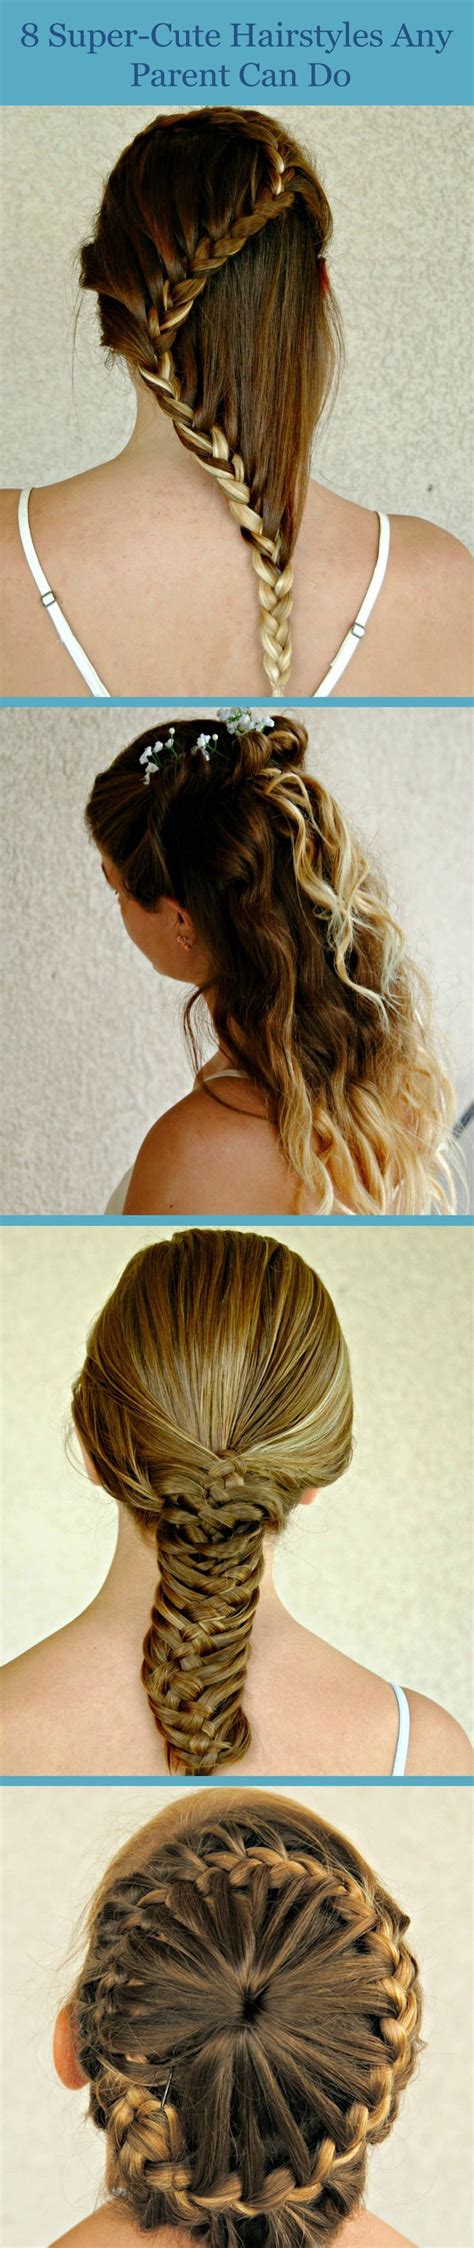 8 Super Cute Hairstyles Any Parent Can Do Themselves Super Cute Hairstyles Hair Styles Cute